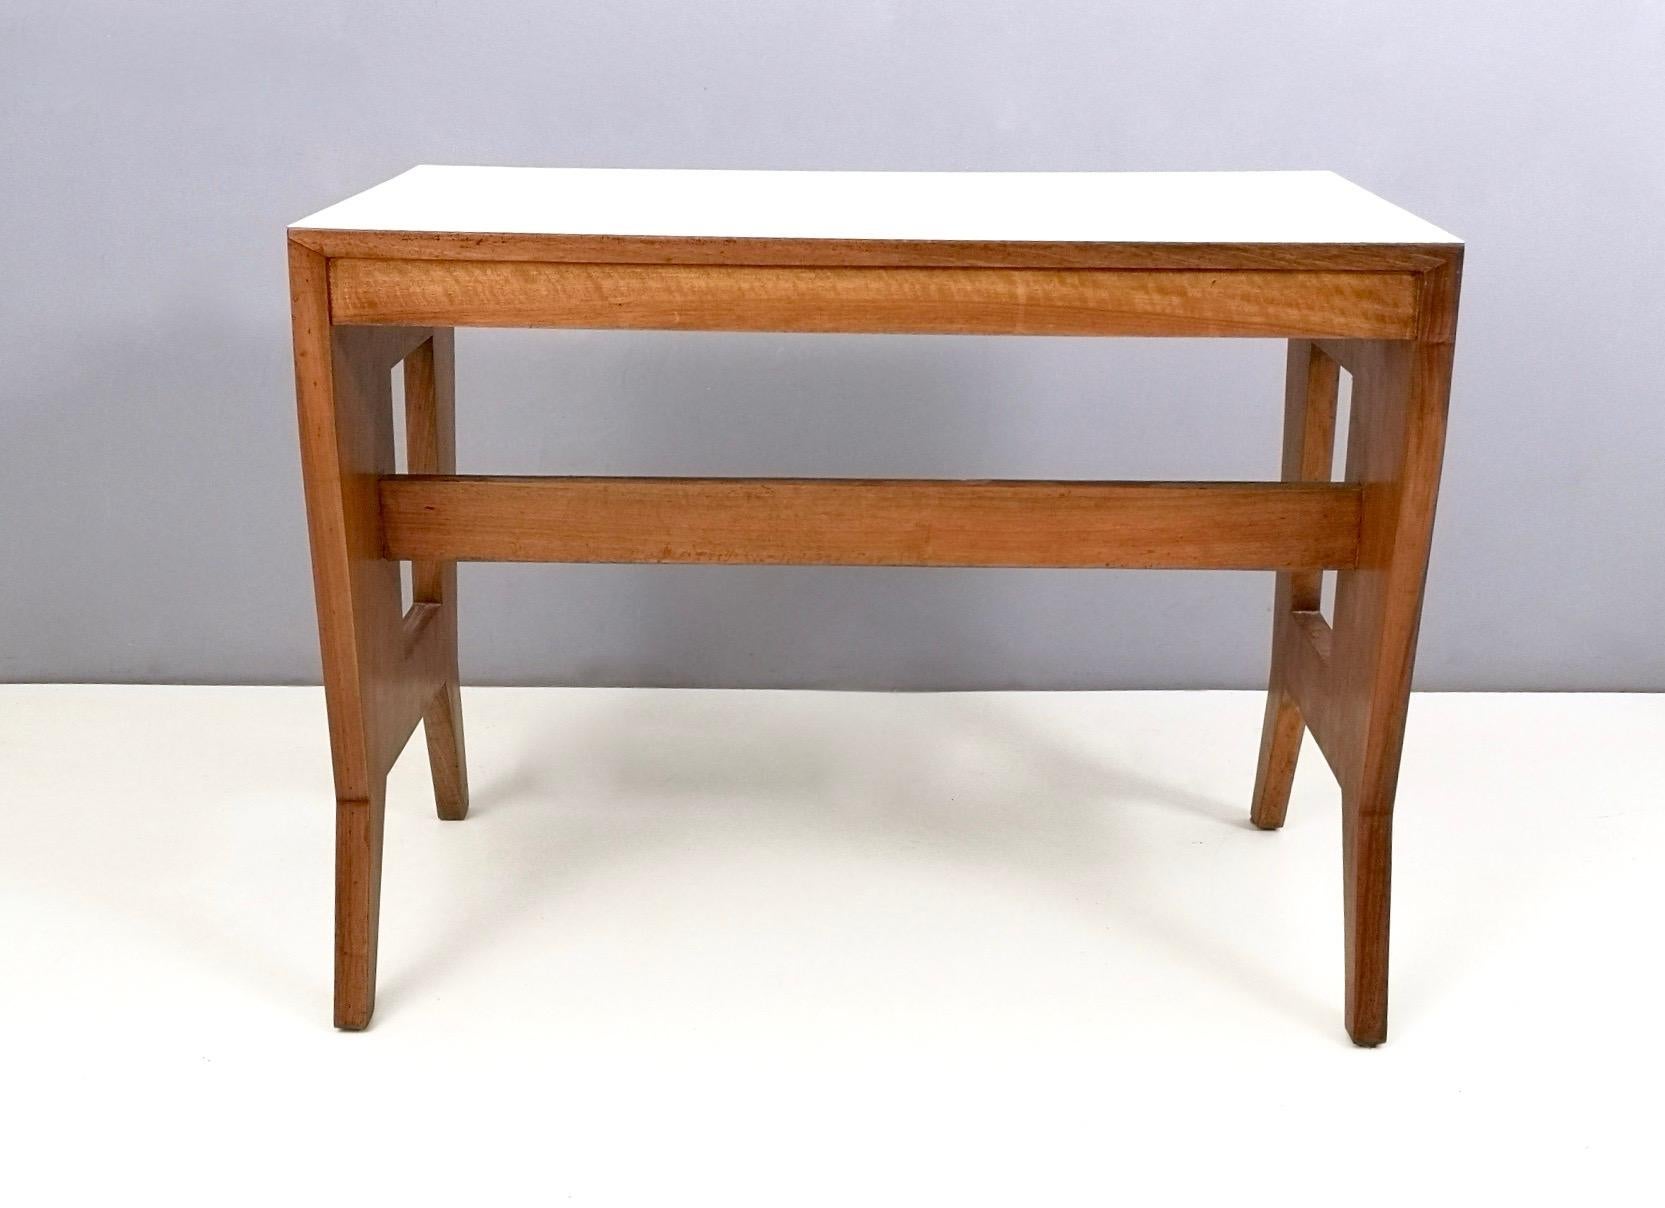 Mid-20th Century Solid Walnut Writing Desk by Gio Ponti for the University of Padova, Italy